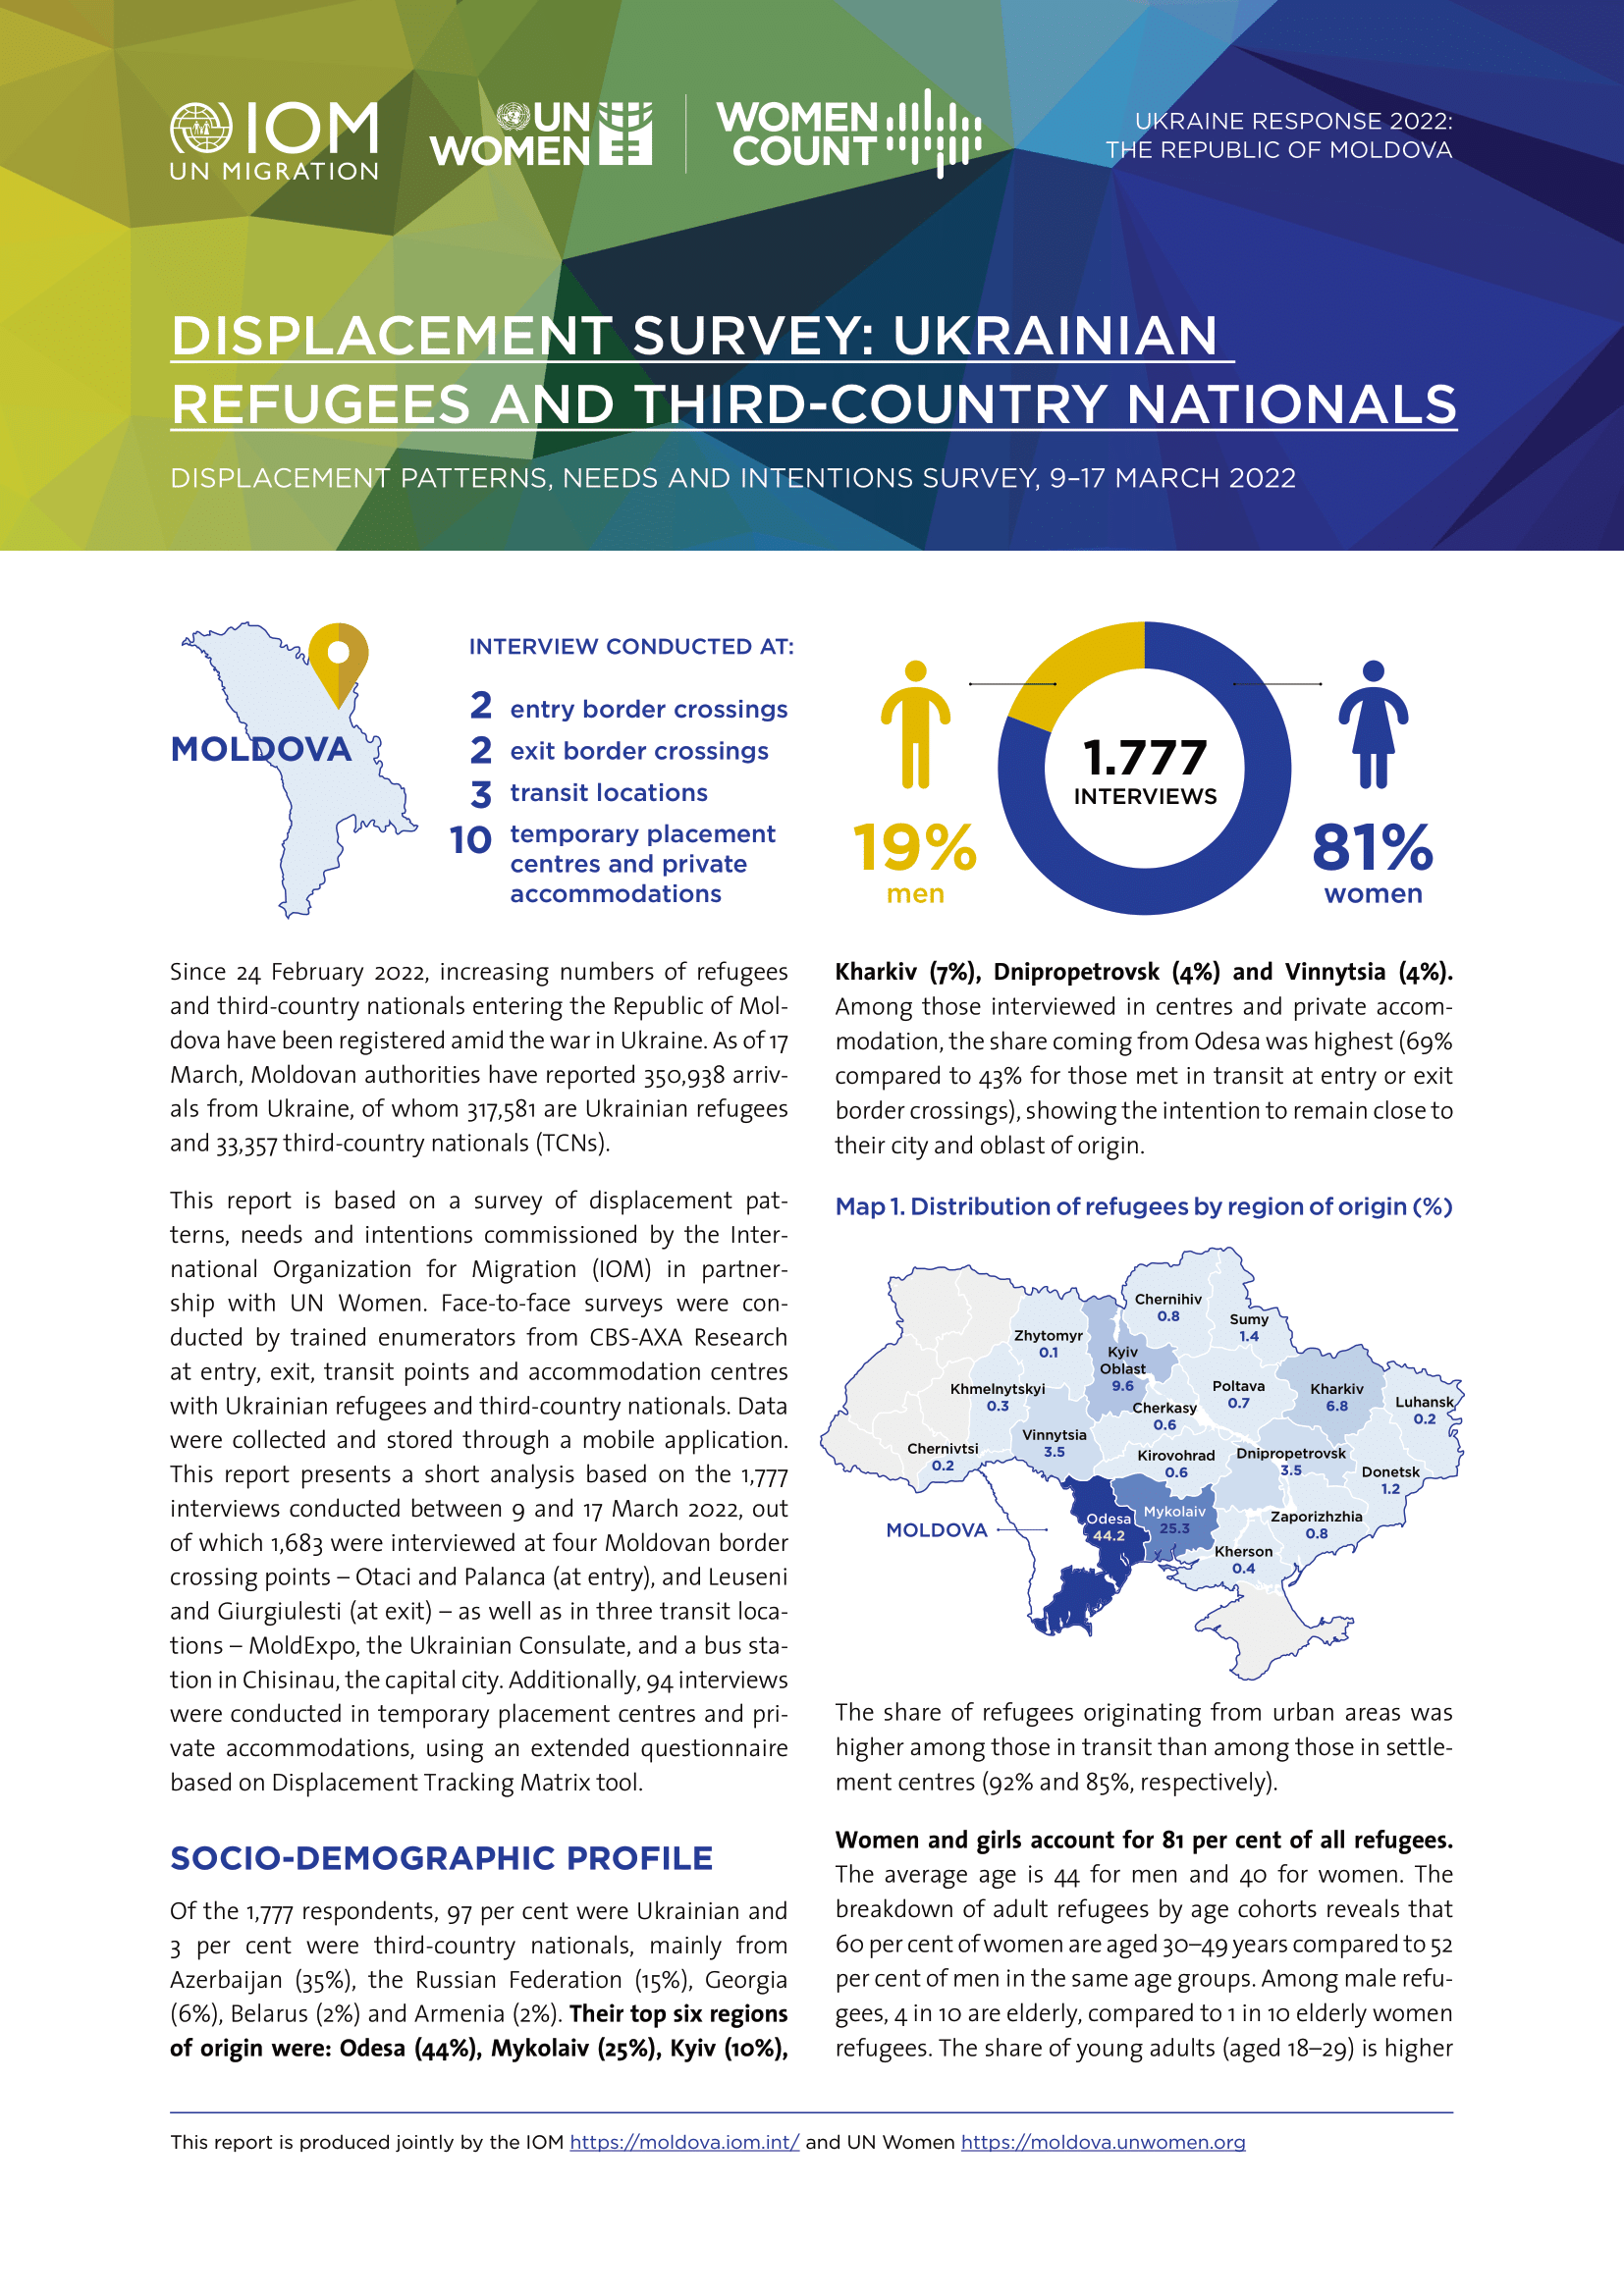 Displacement survey: Ukrainian refugees and third-country nationals